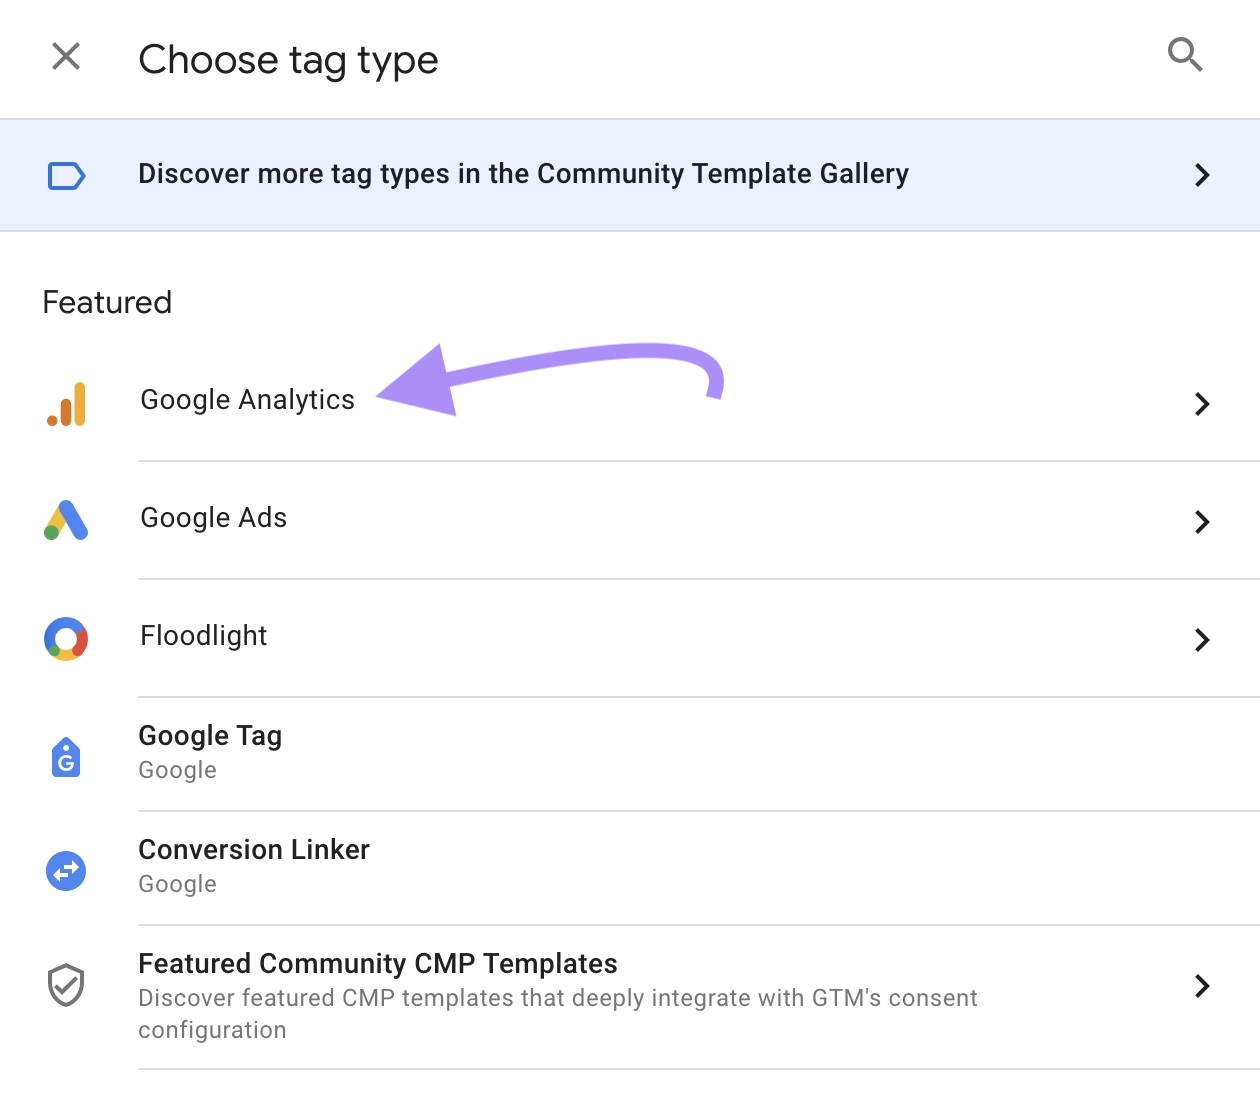 "Google Analytics" selected nether  "Choose tag type"